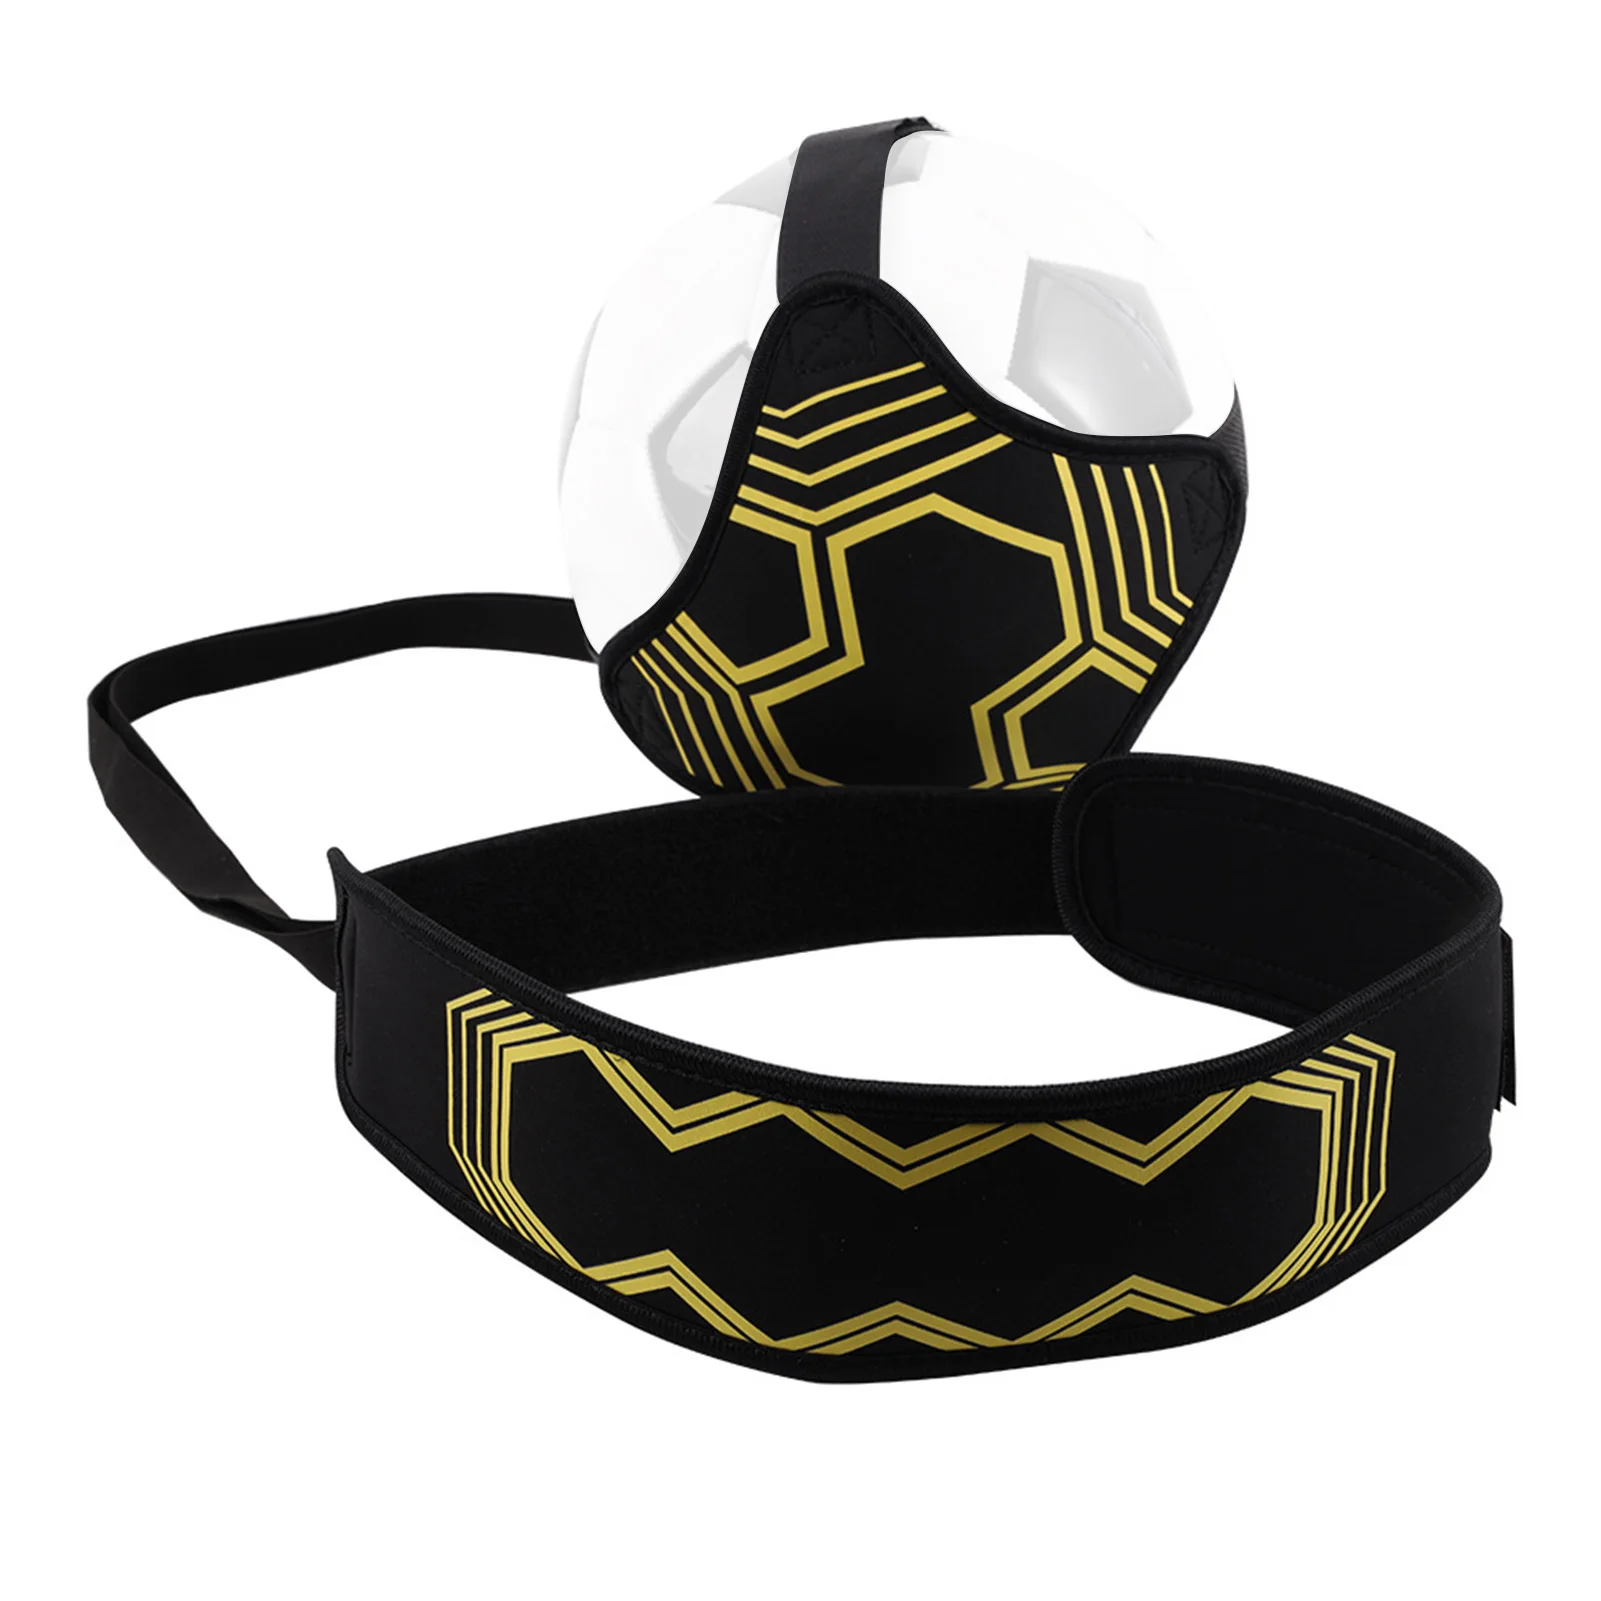 

Football Practice Belt Useful Soccer Training Belt For Developing Controlling Ball Skill Adjustable Portable Stretchable Kids Ad